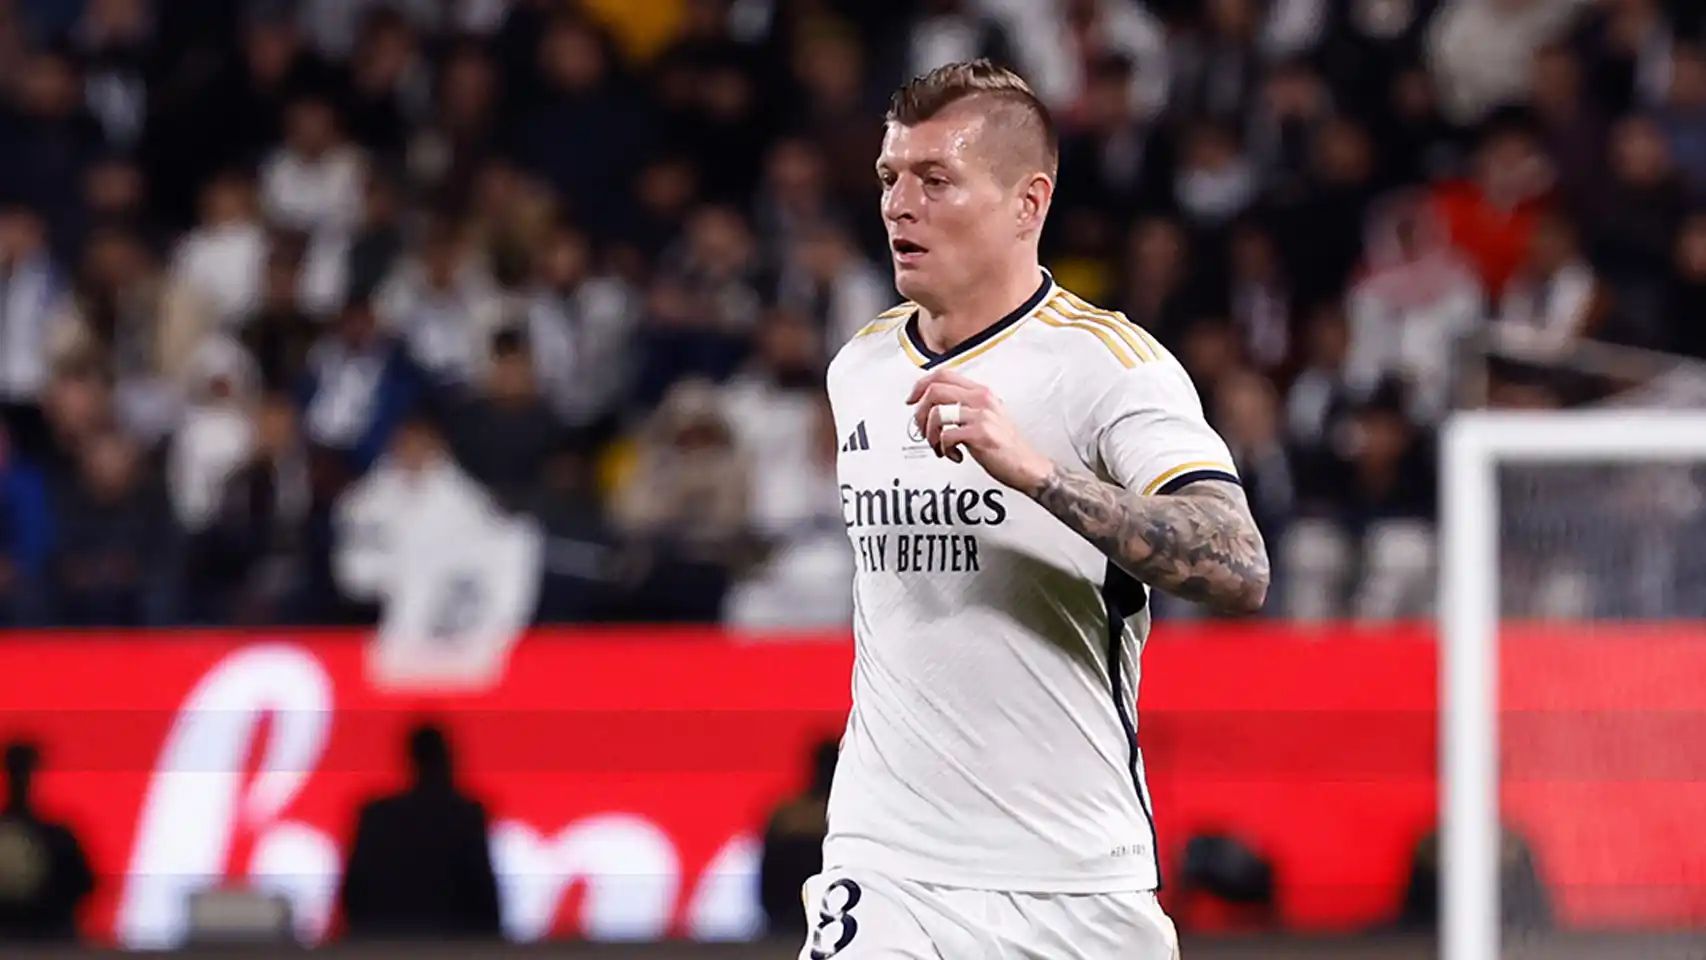 Real Madrid star Toni Kroos infuriates fans with refereeing comments following controversy against RB Leipzig